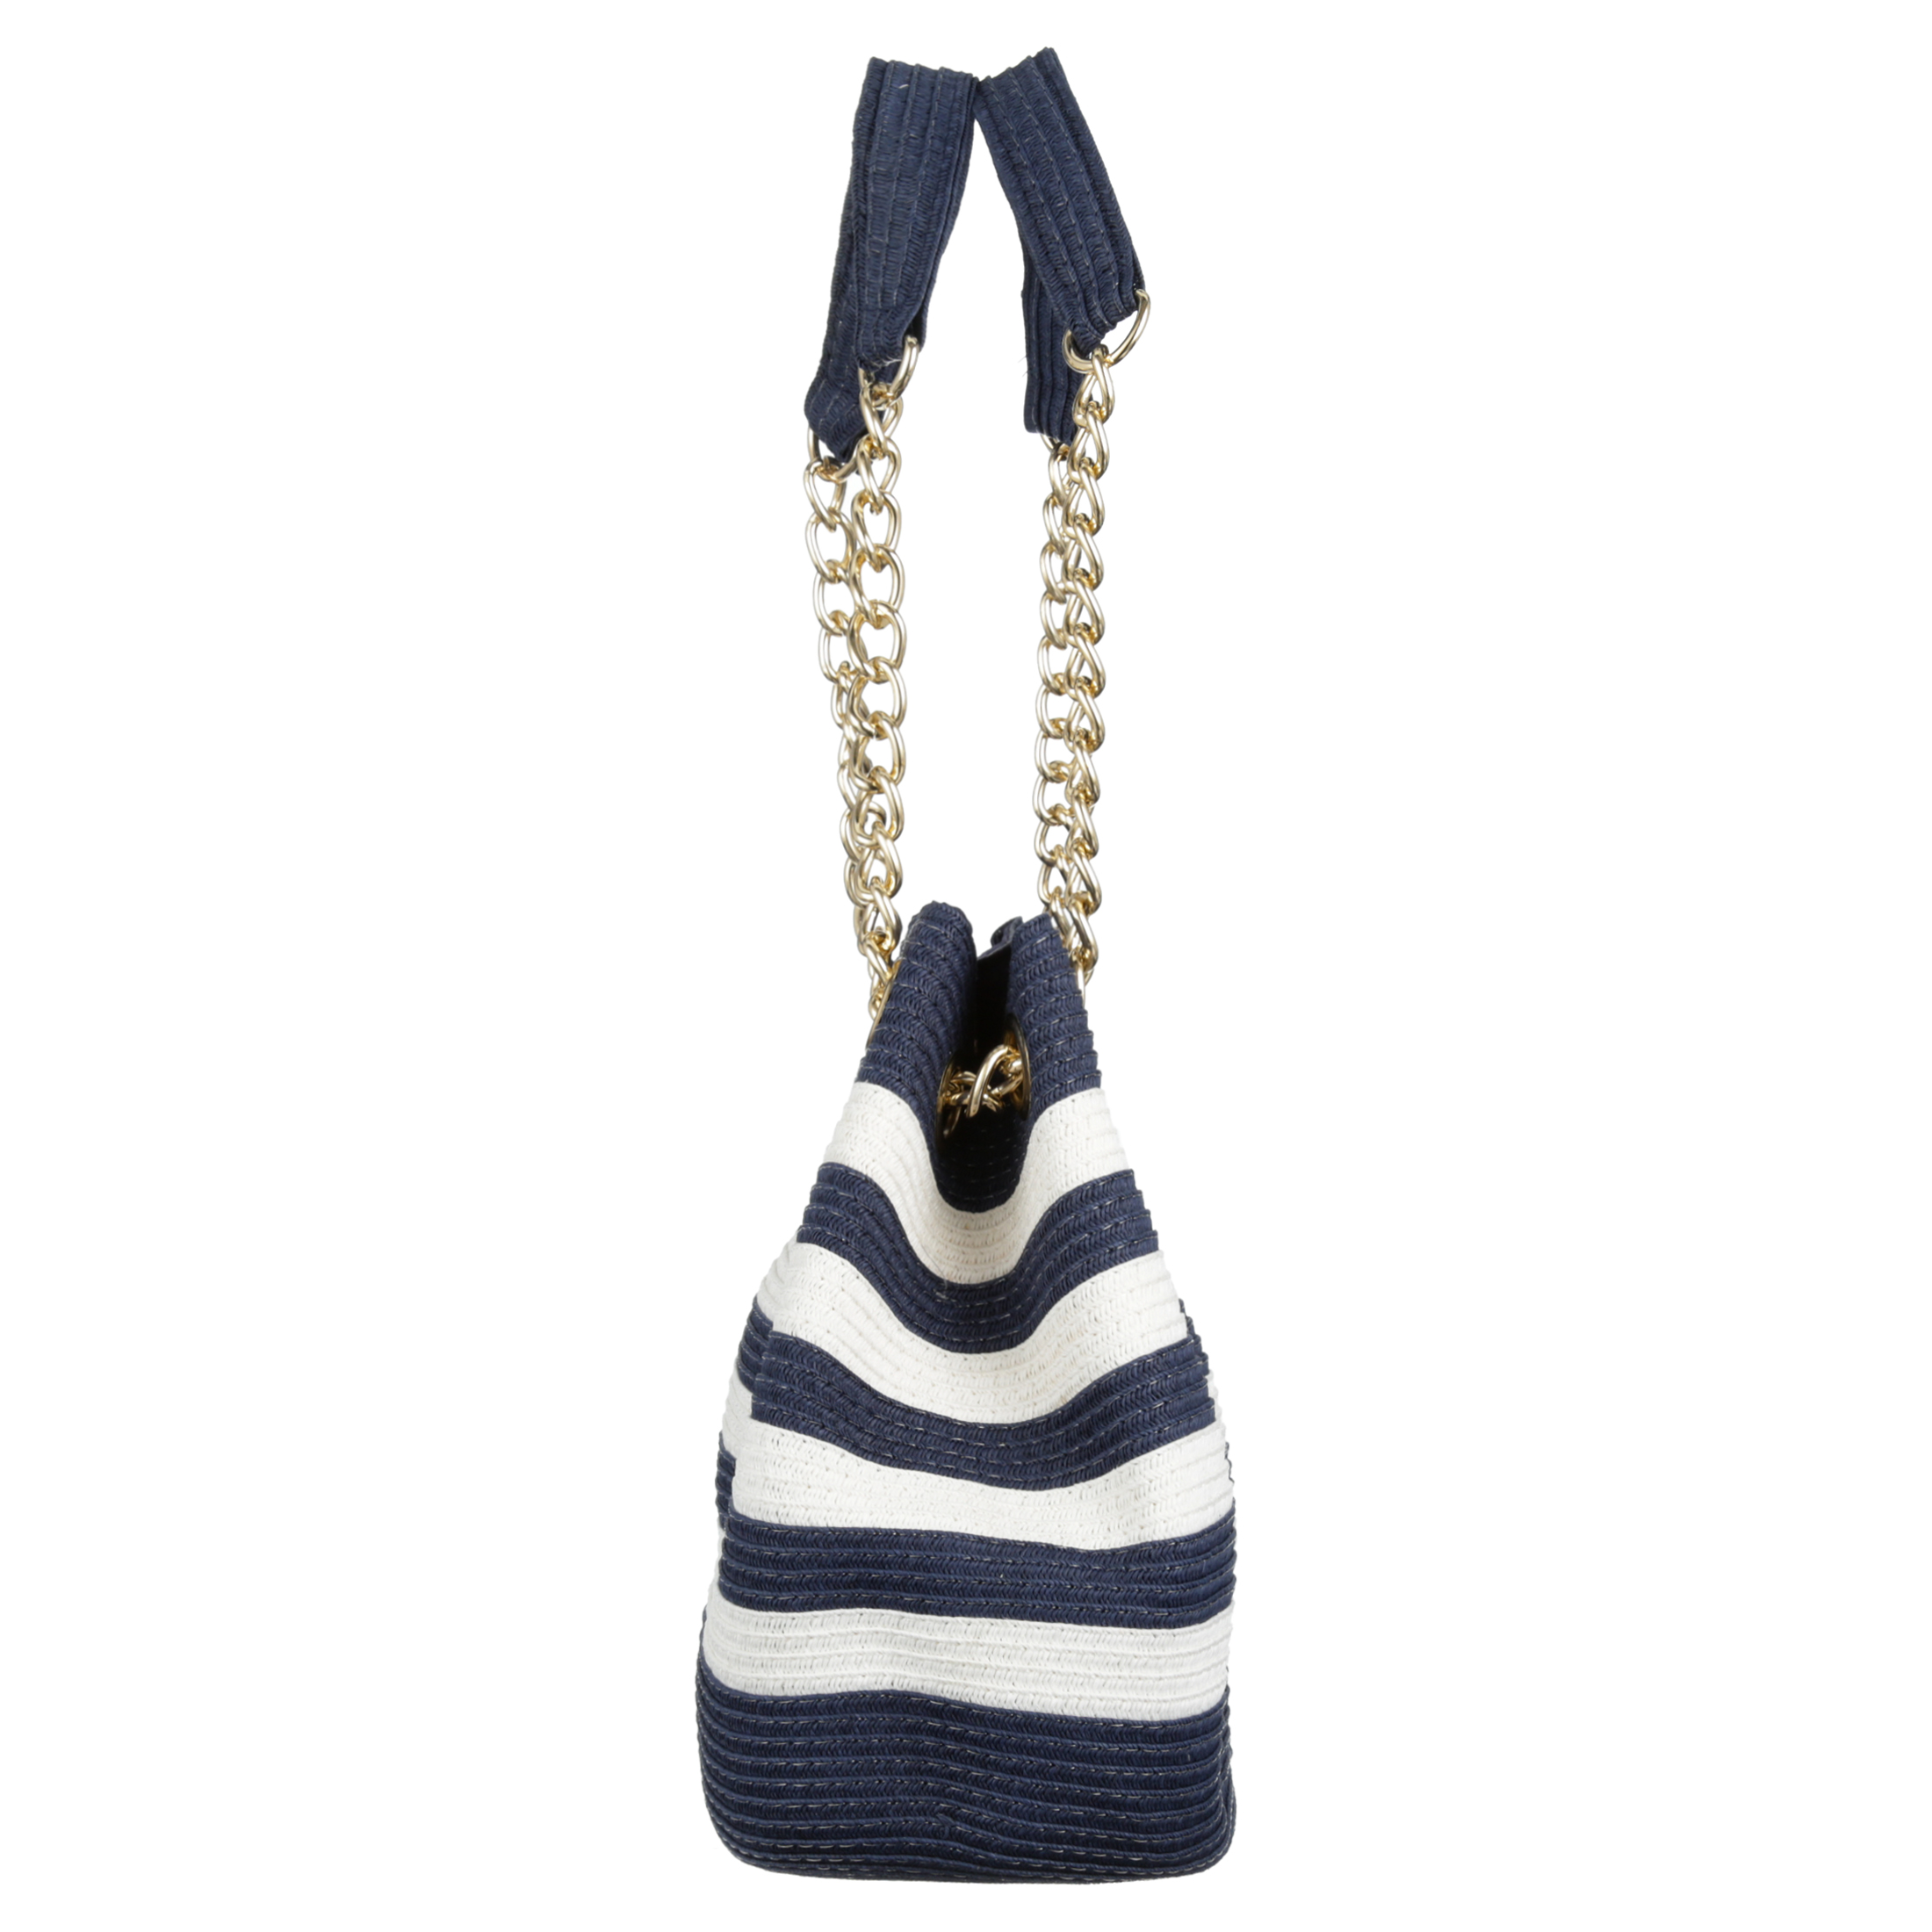 Magid Women's Adult Paper Straw Beach Handbag with Gold Chain Navy White - image 4 of 4